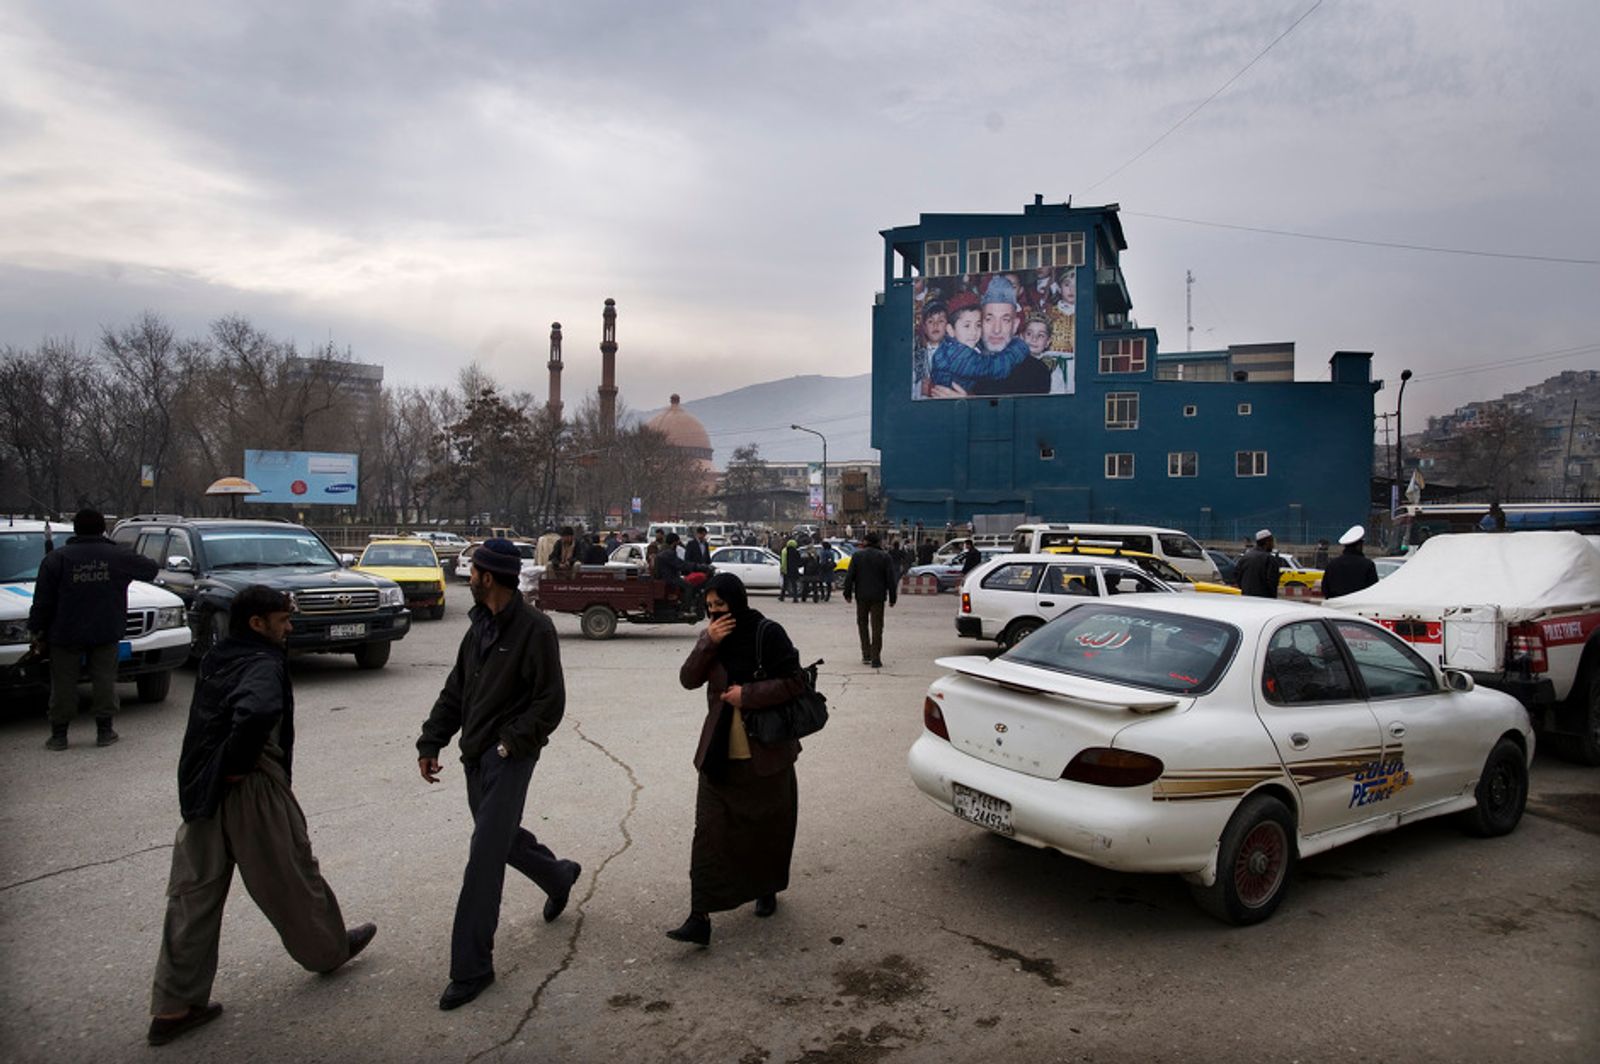 © Daniel Pilar - Image from the Afghanistan coexist photography project